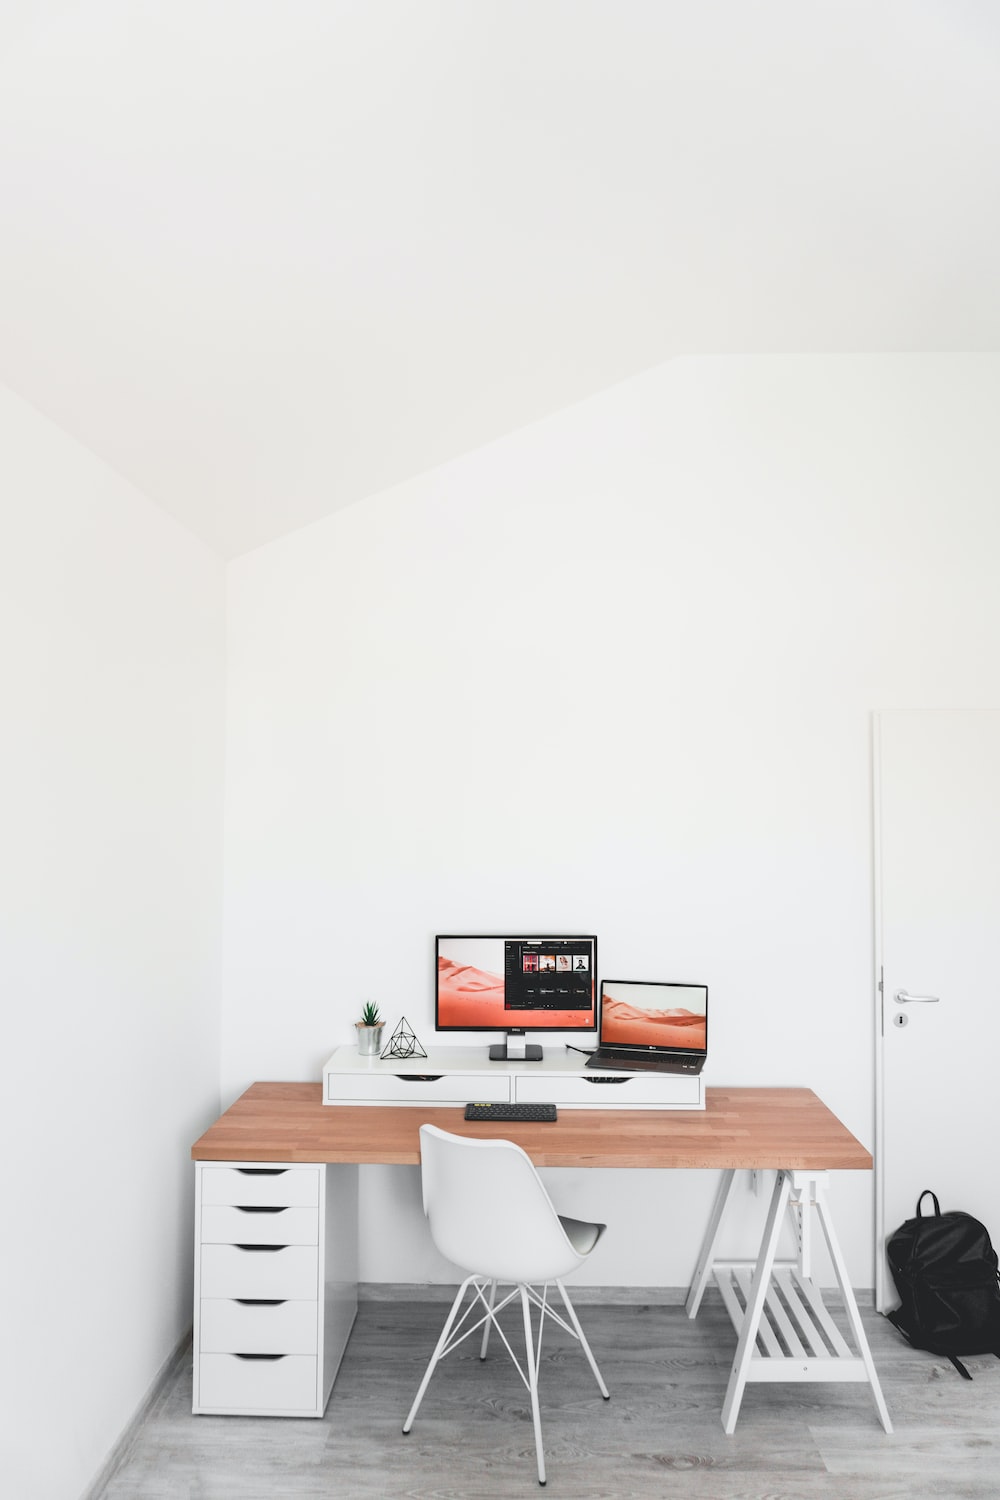 What is a desk with drawers called?